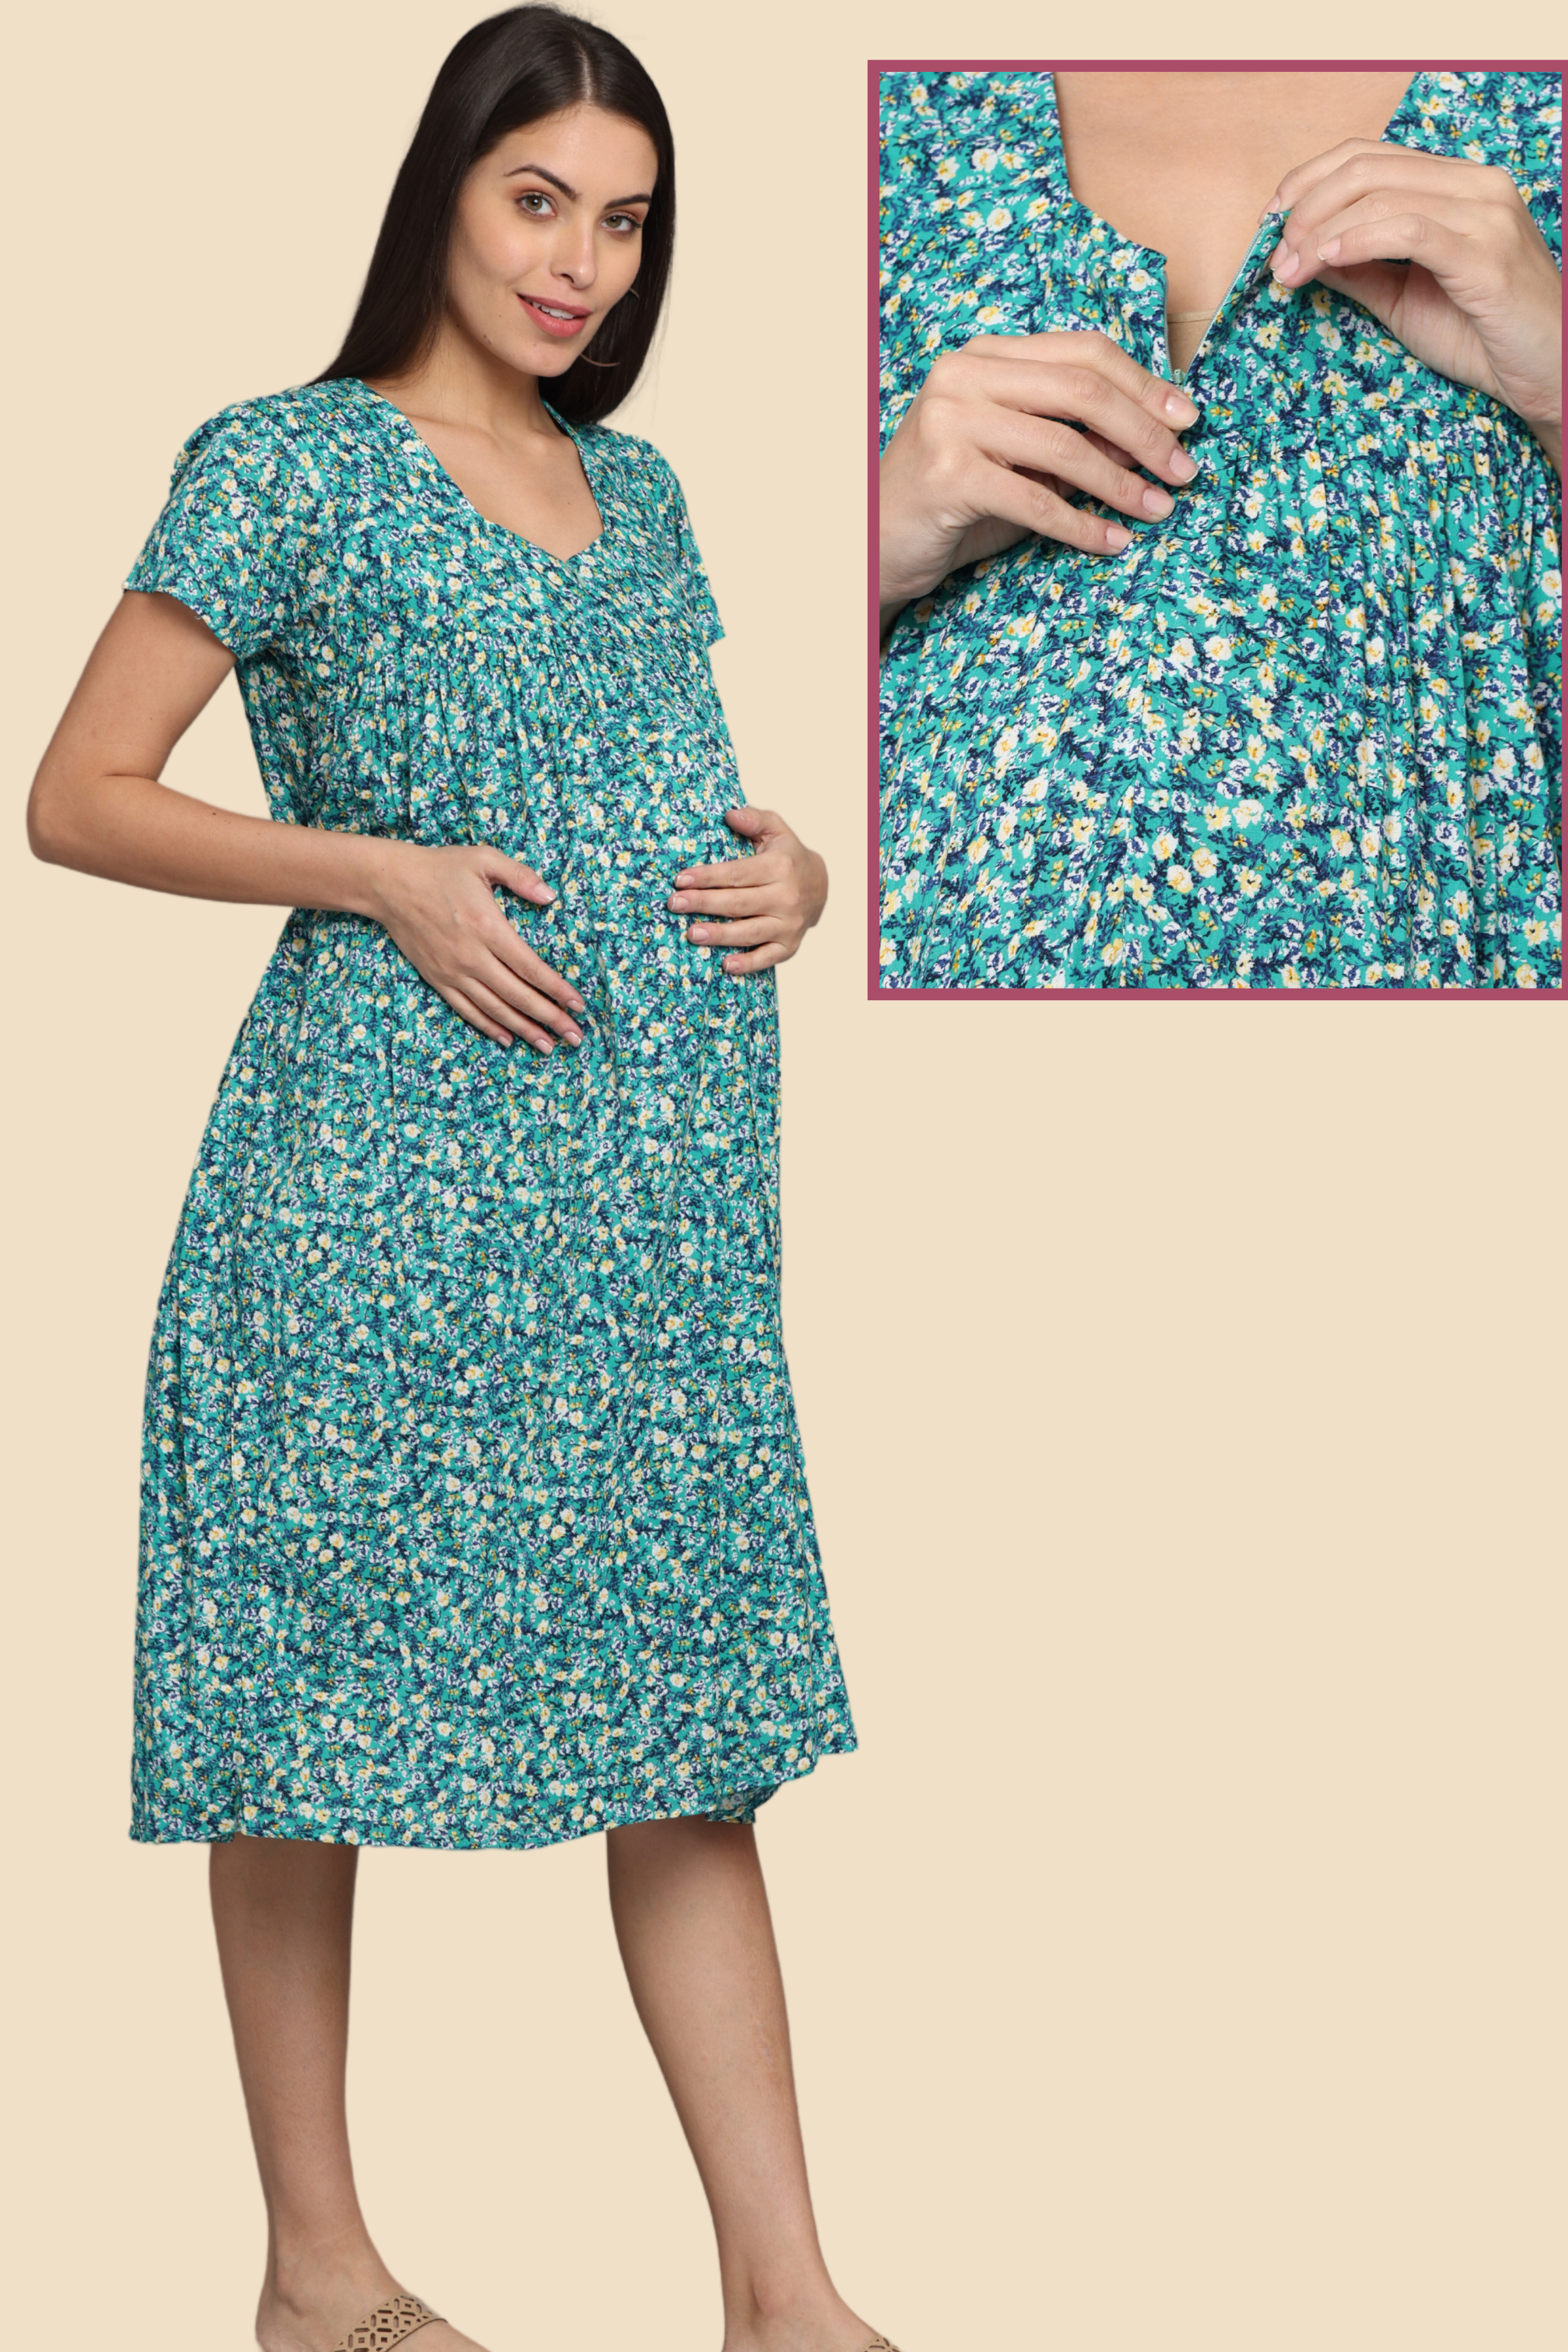 Classic Cotton Nursing Dress | Latched Mama Dresses ✔️ Perfect for summer  ✔️ Breastfeeding friendly- nursing and pumping ✔️ Multiple options in sizes  xxs- 3x ✔️ Great for babywearing... | By Latched MamaFacebook